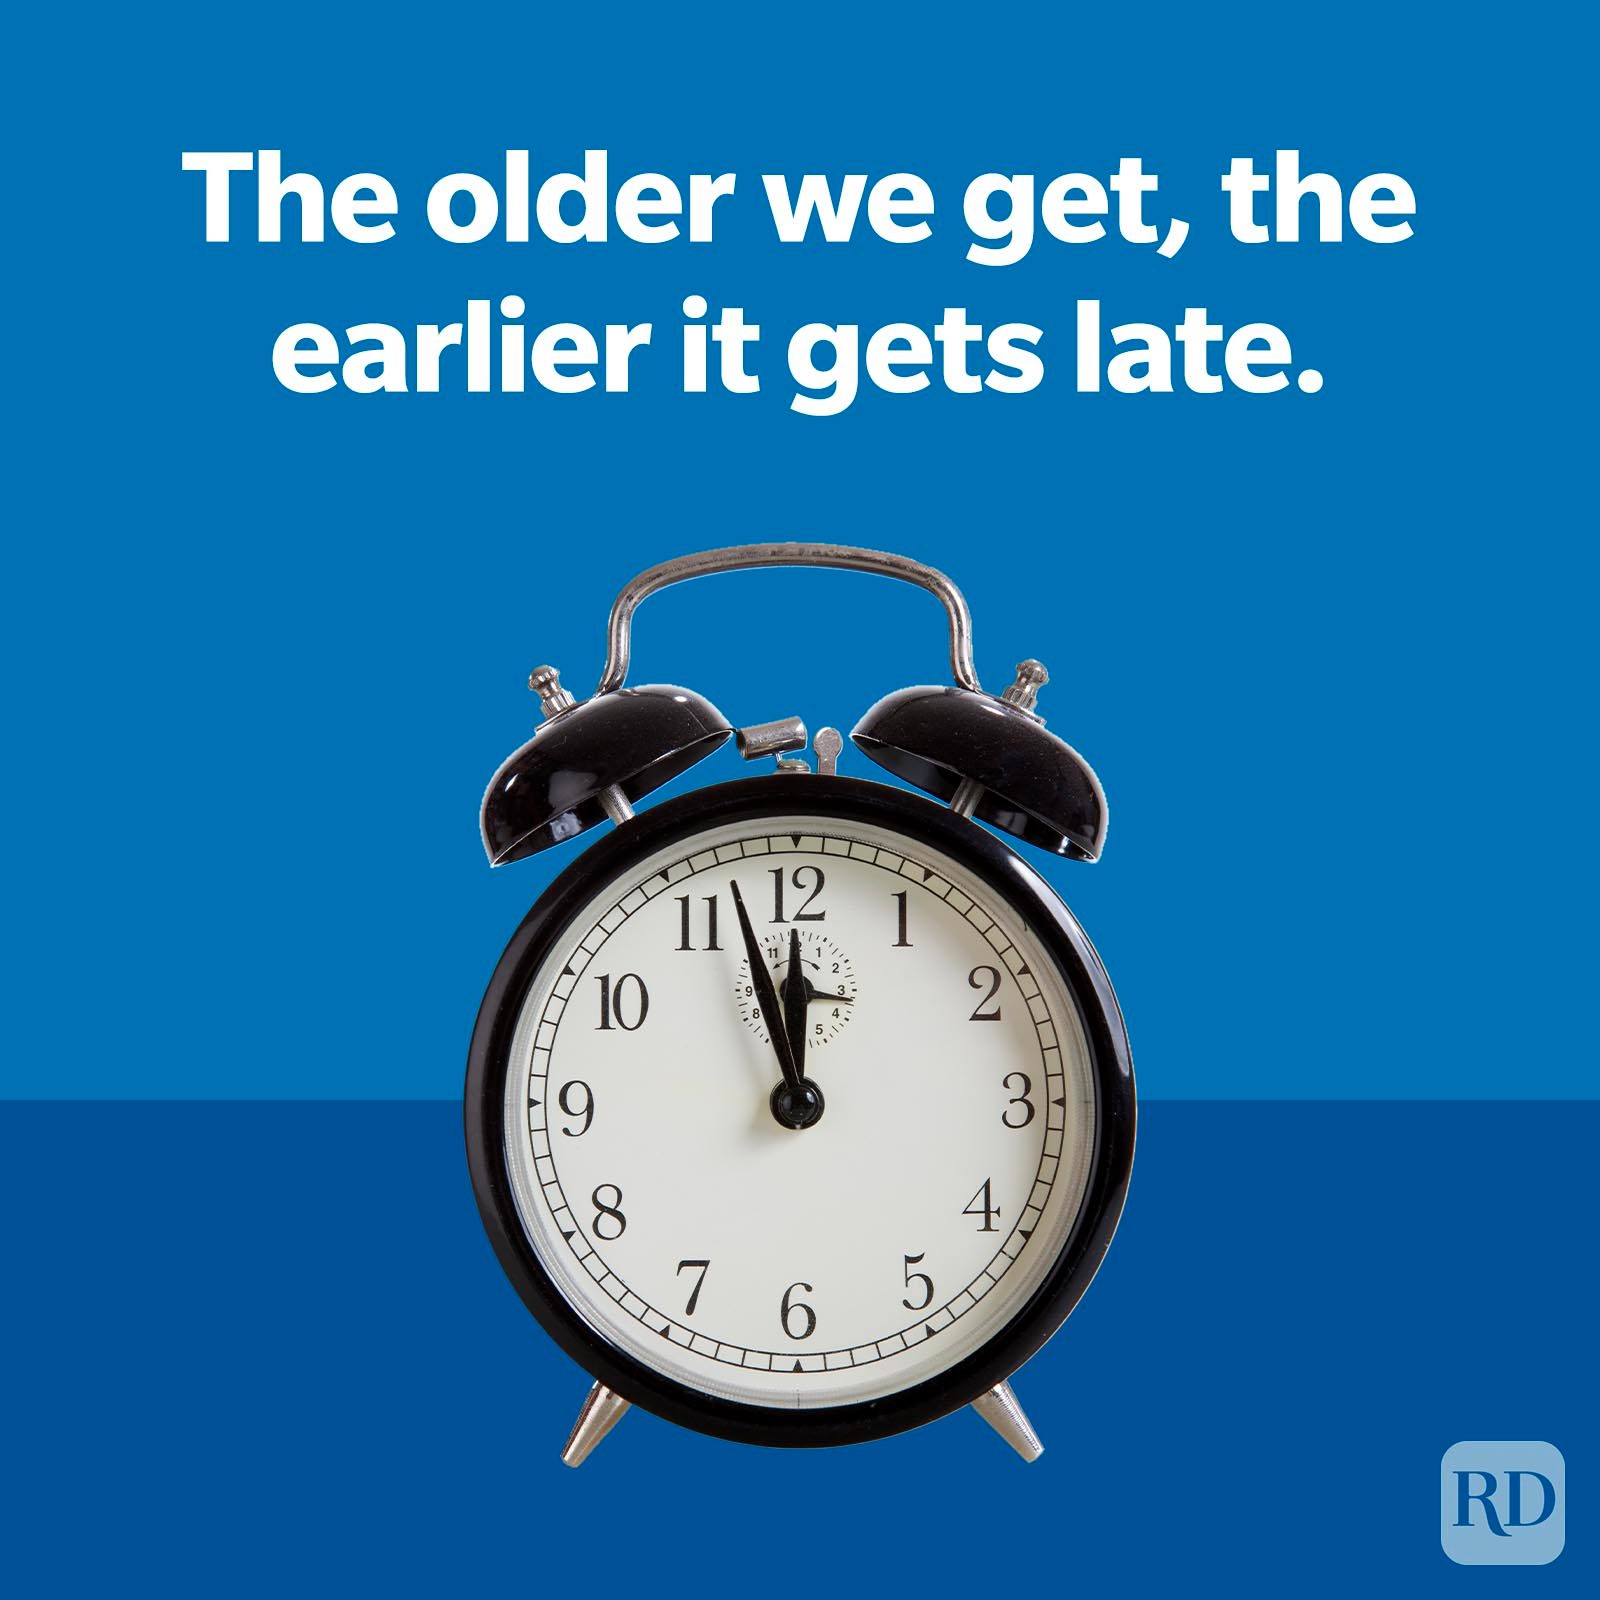 60 Old-People Jokes For Seniors That Make Aging So Much Funnier